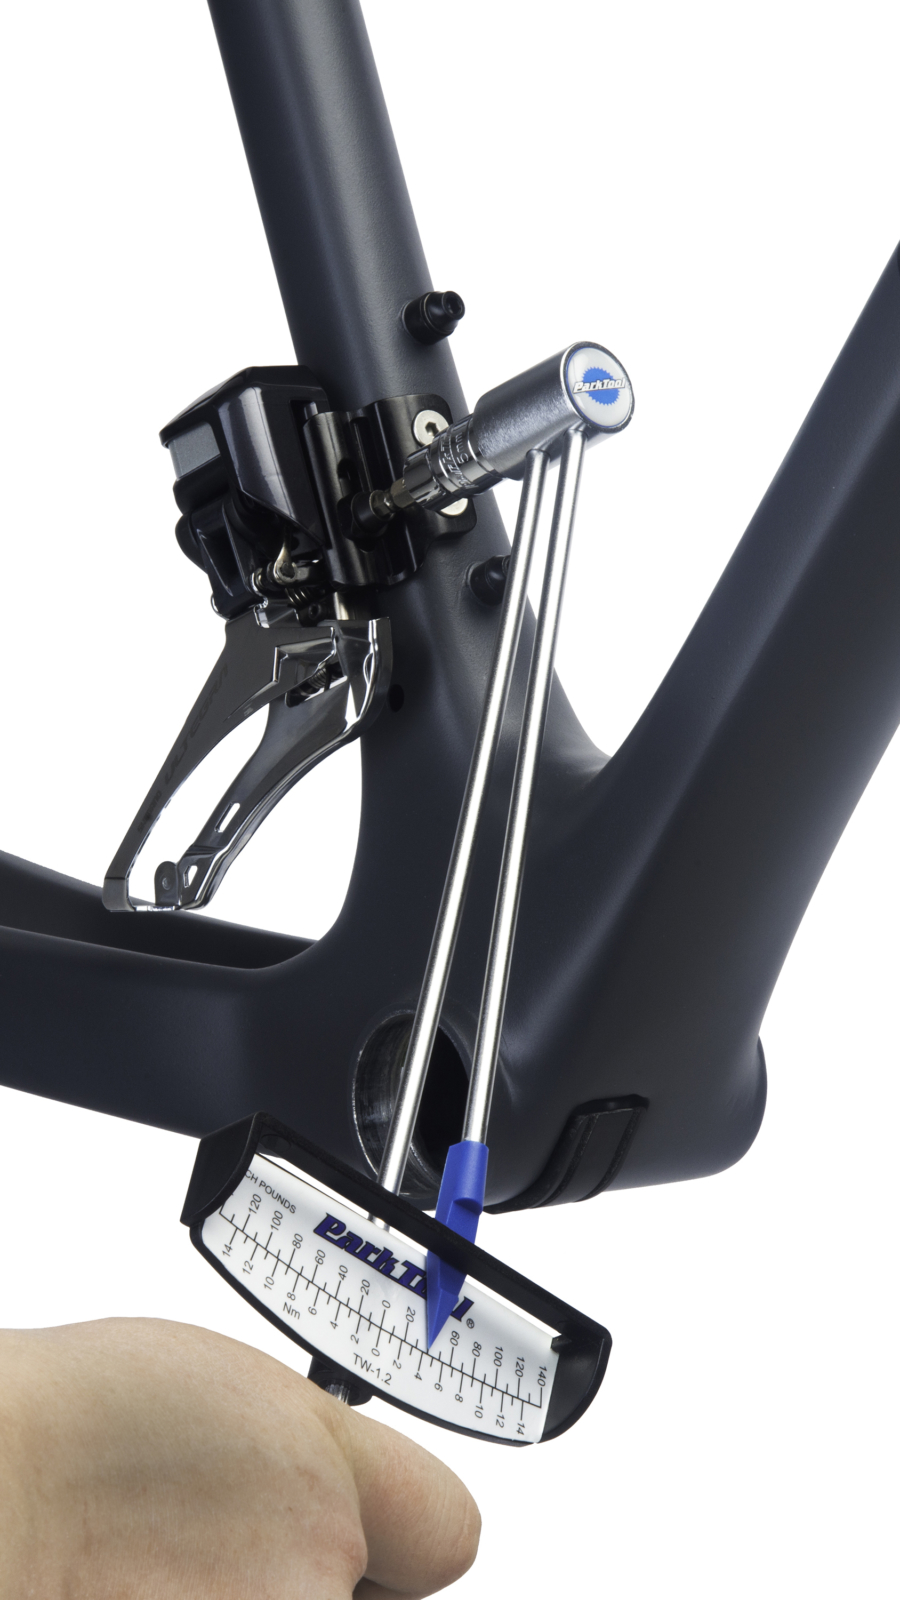 The Park Tool TW-1.2 Beam-Type Torque Wrench torquing a front derailleur mount bolt on a road bike frame, enlarged